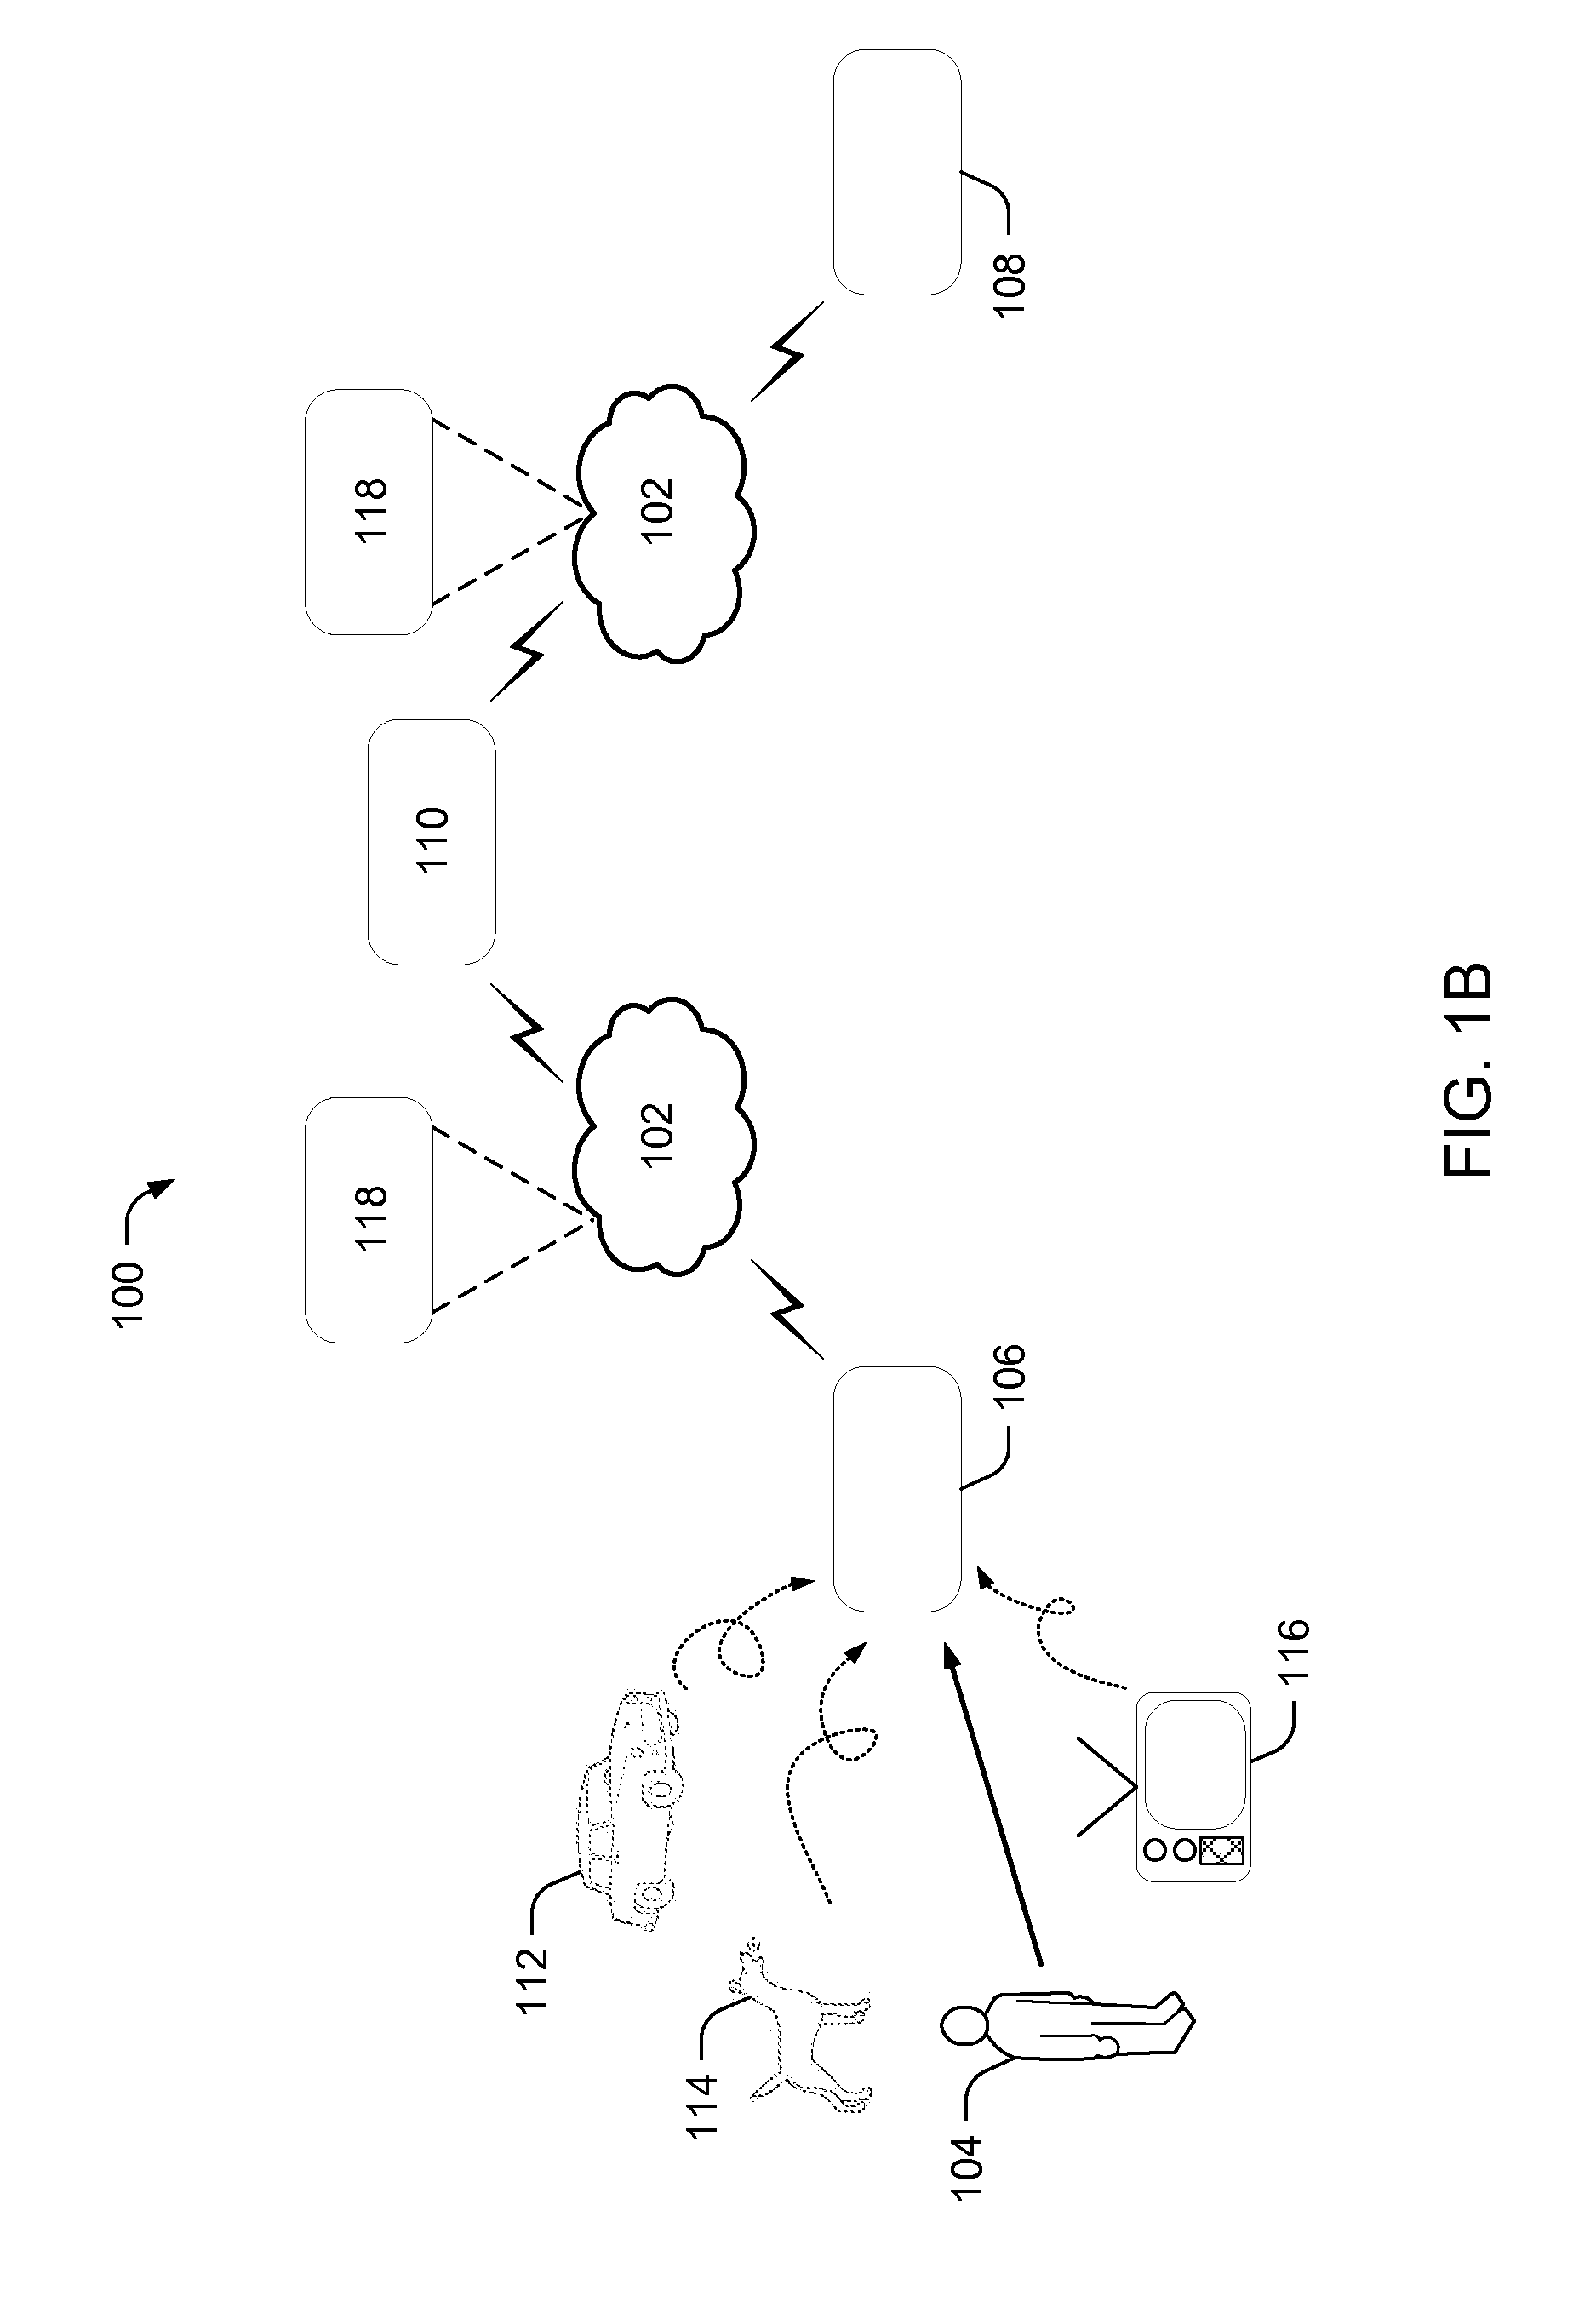 Systems and methods for noise reduction using speech recognition and speech synthesis